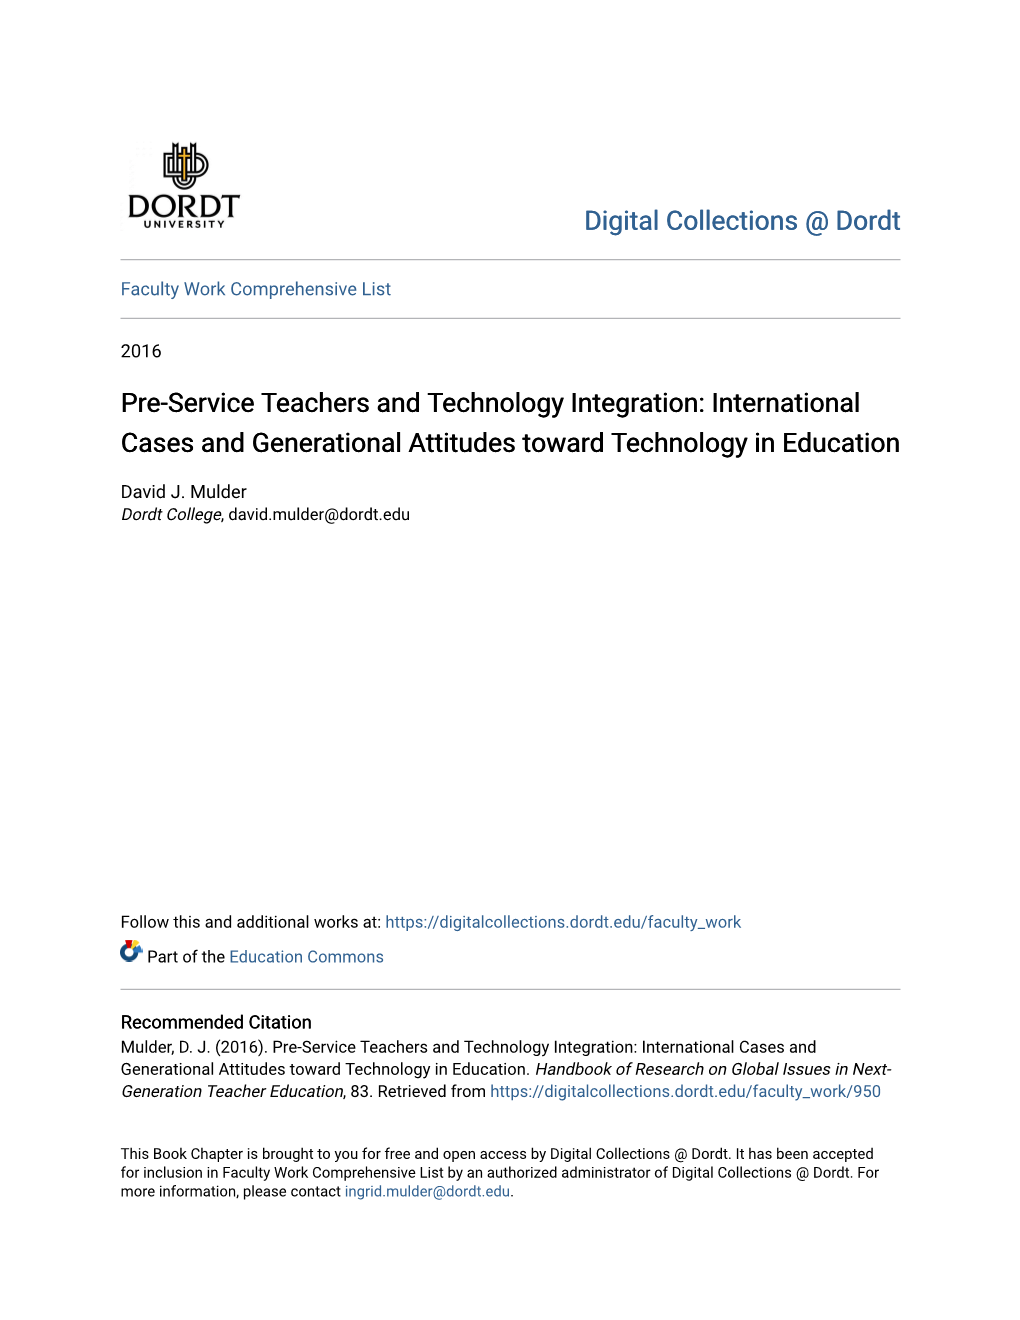 Pre-Service Teachers and Technology Integration: International Cases and Generational Attitudes Toward Technology in Education